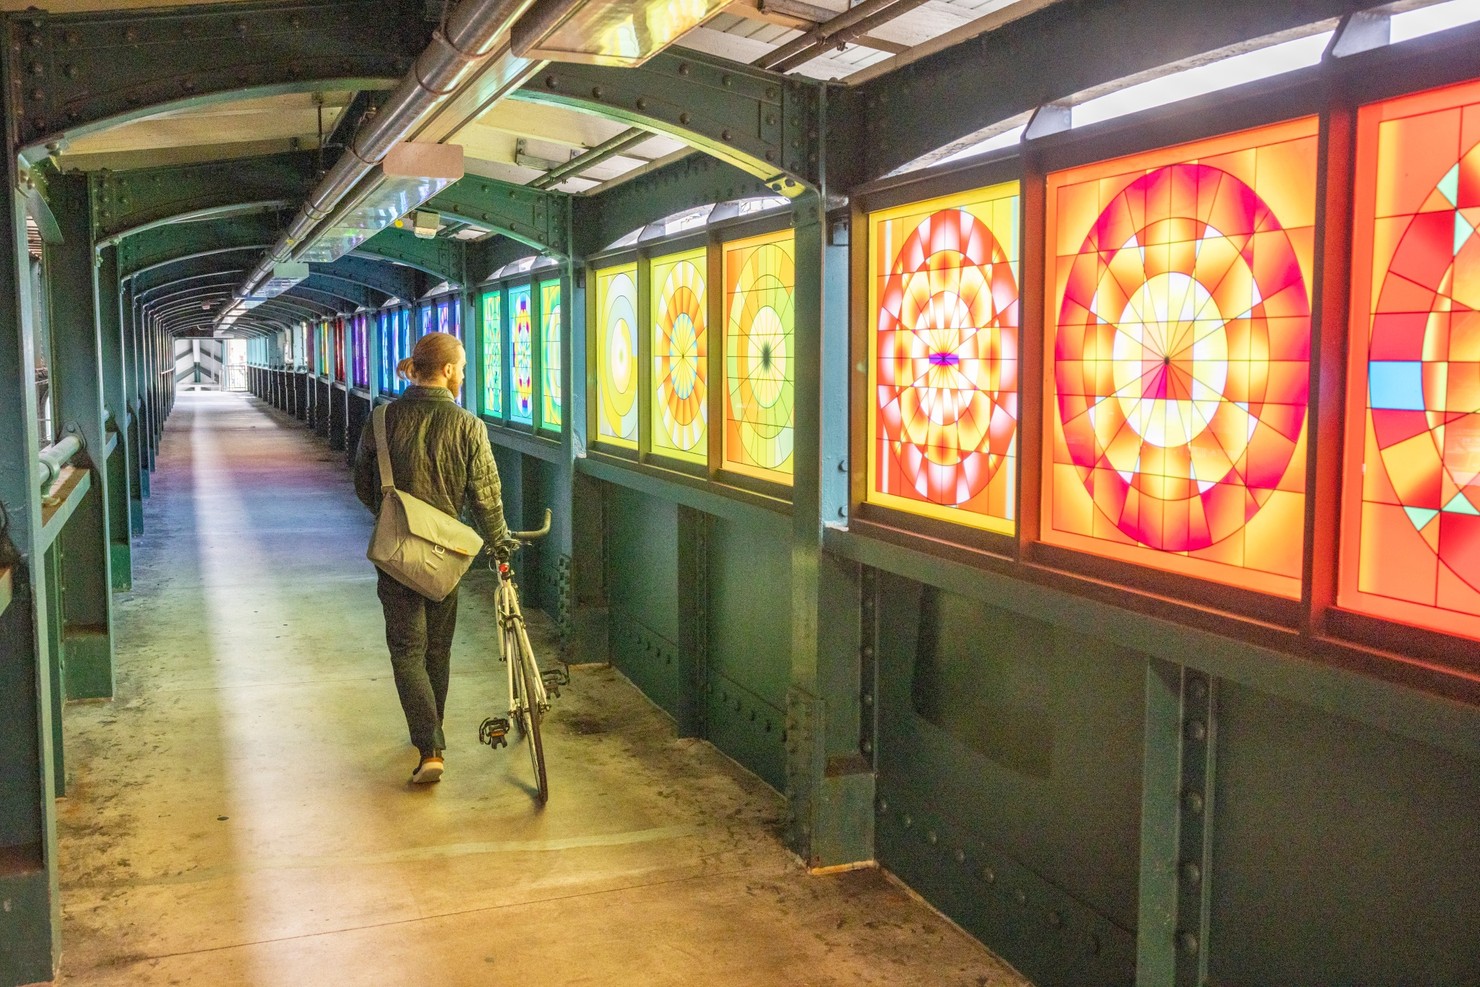 A person walking away from the camera in a tunnel of rainbow light.